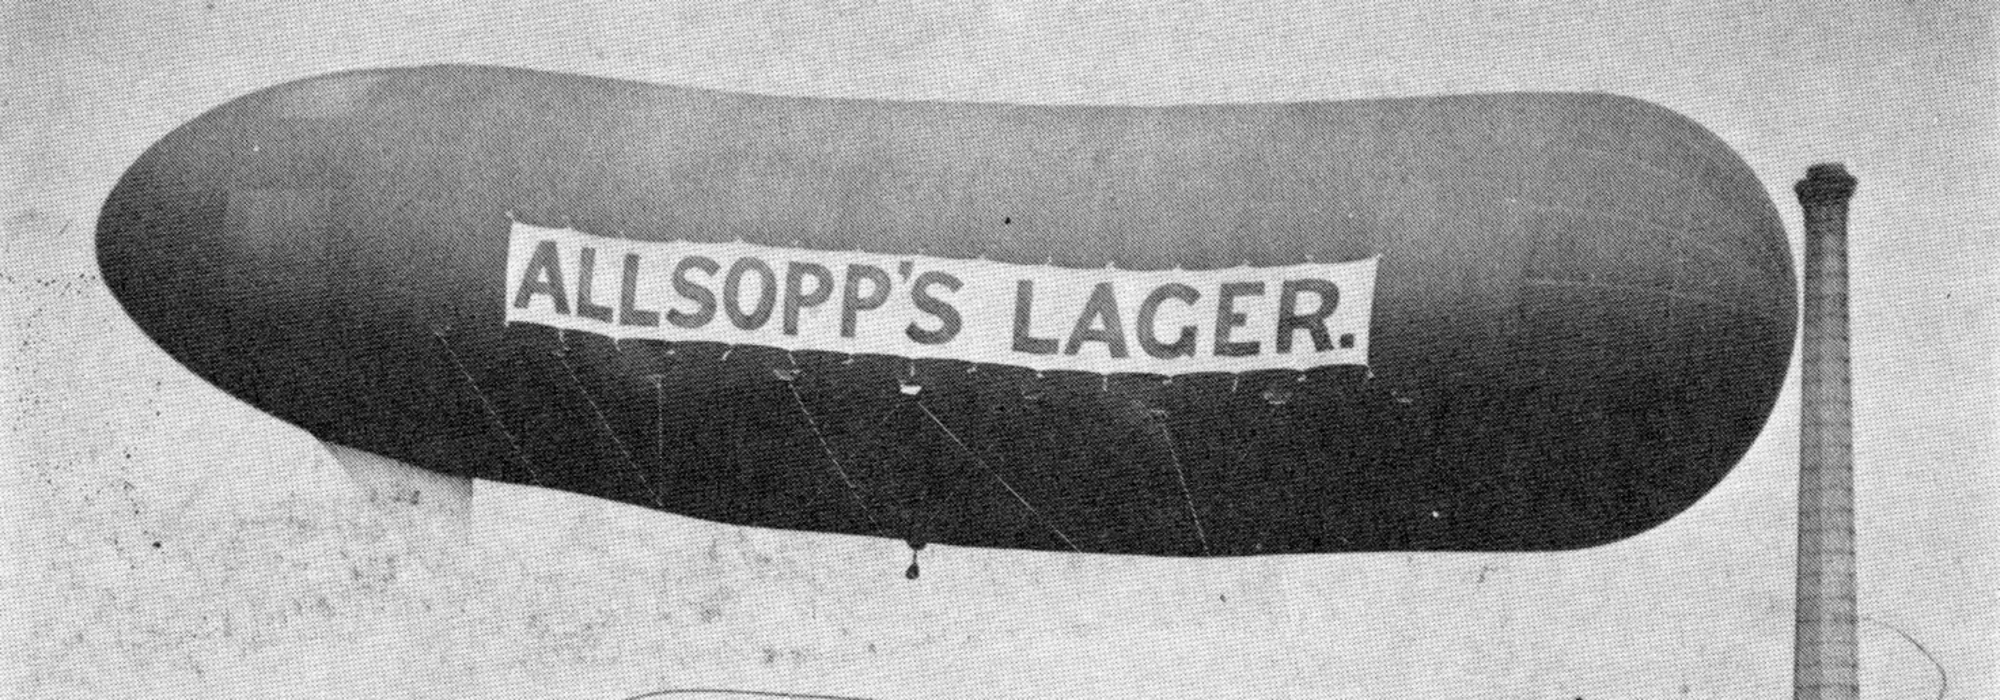 Lager Advertising in the 19th Century